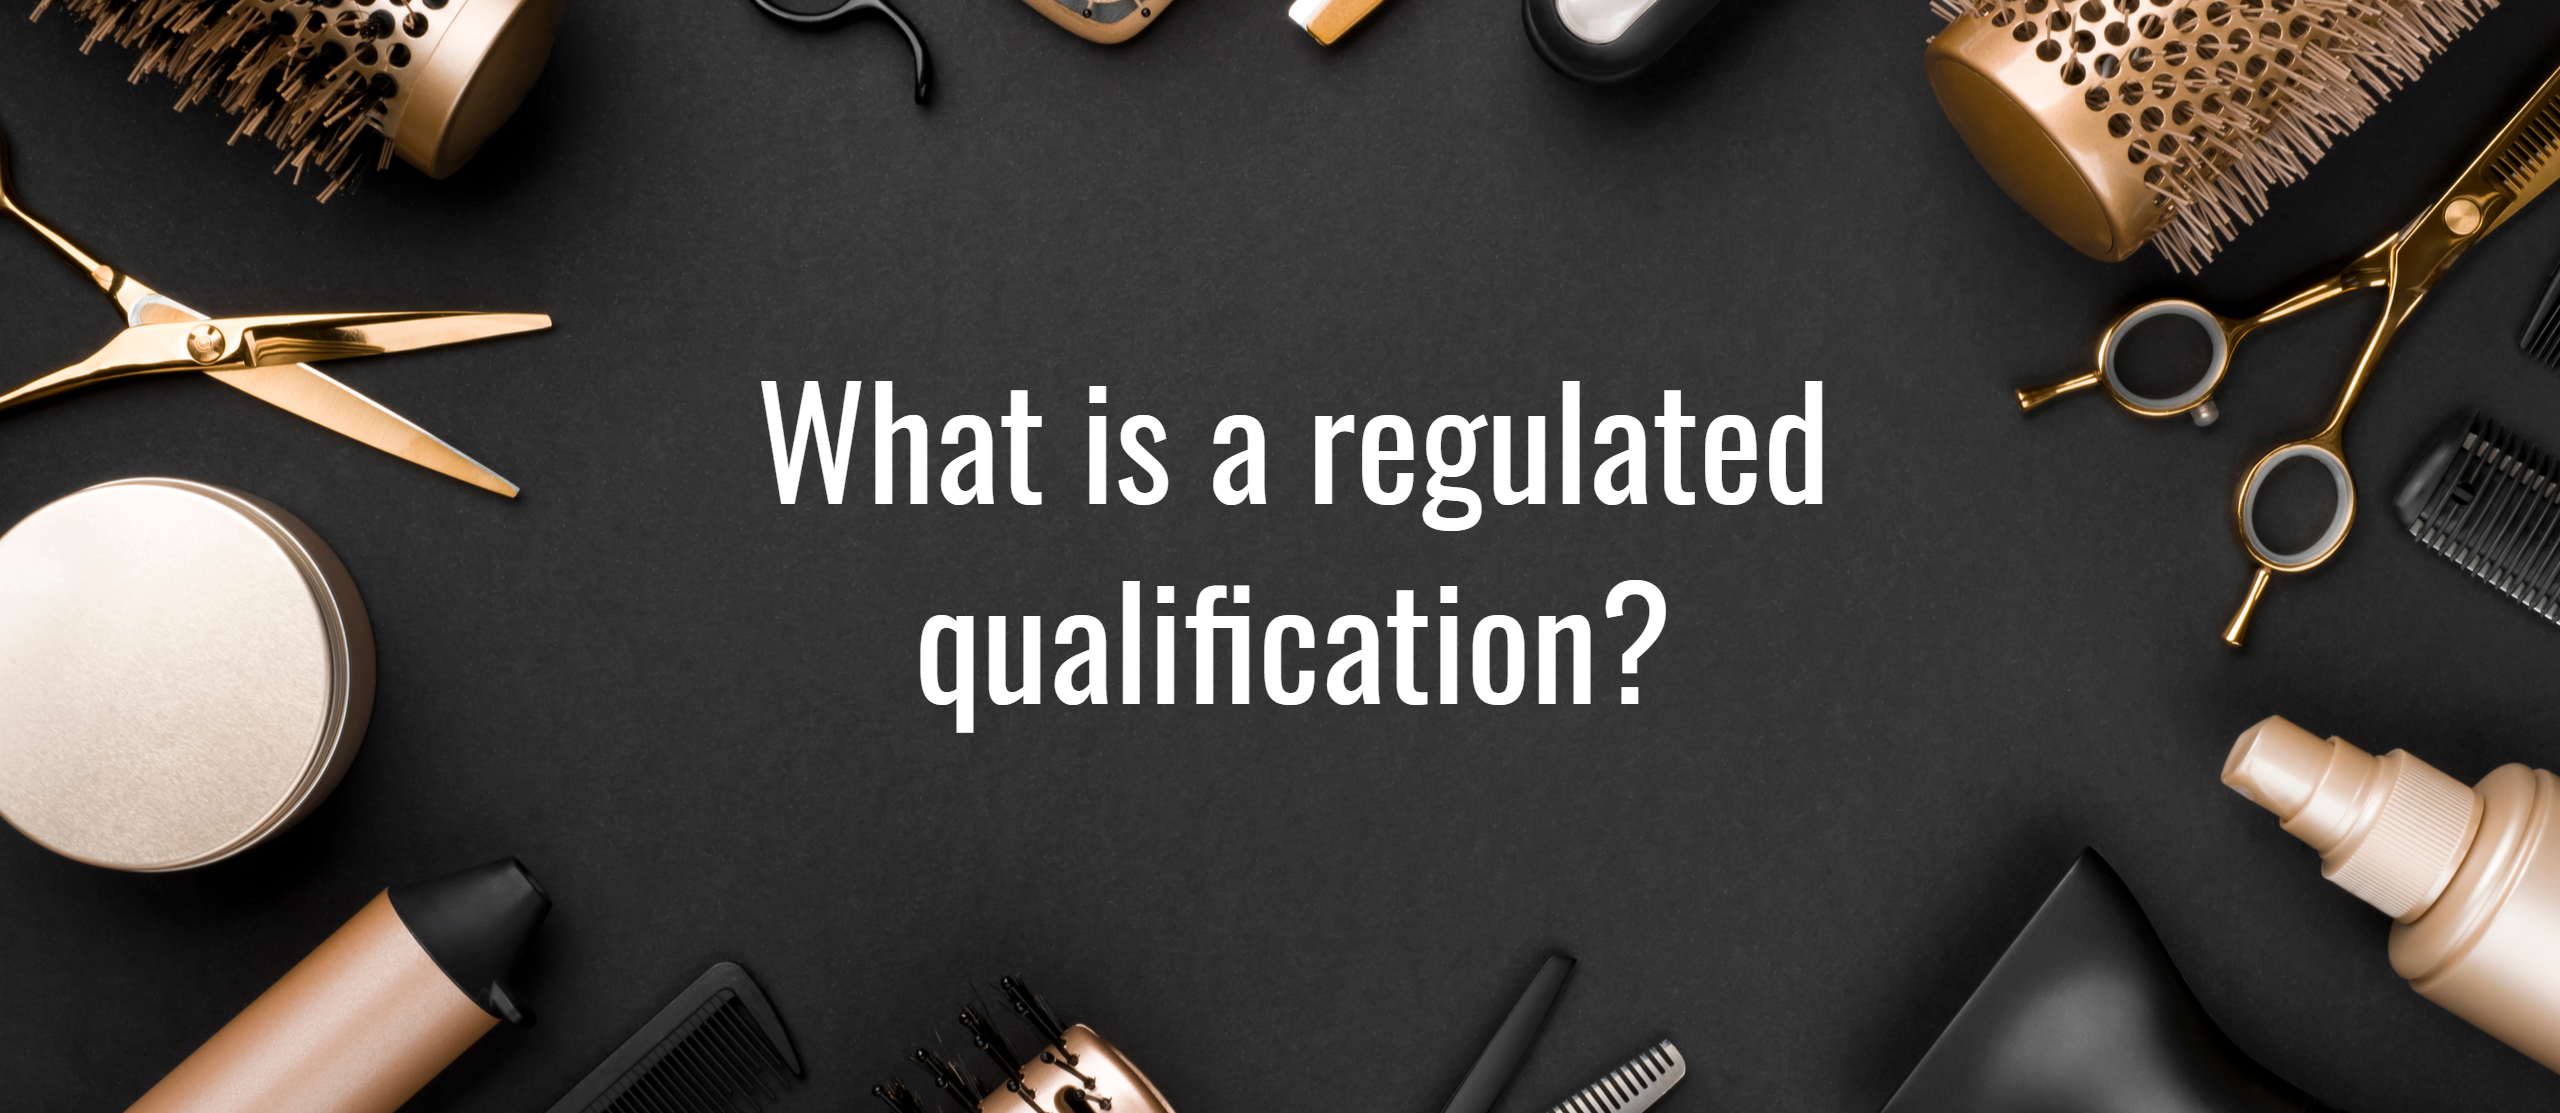 What is a regulated qualification?